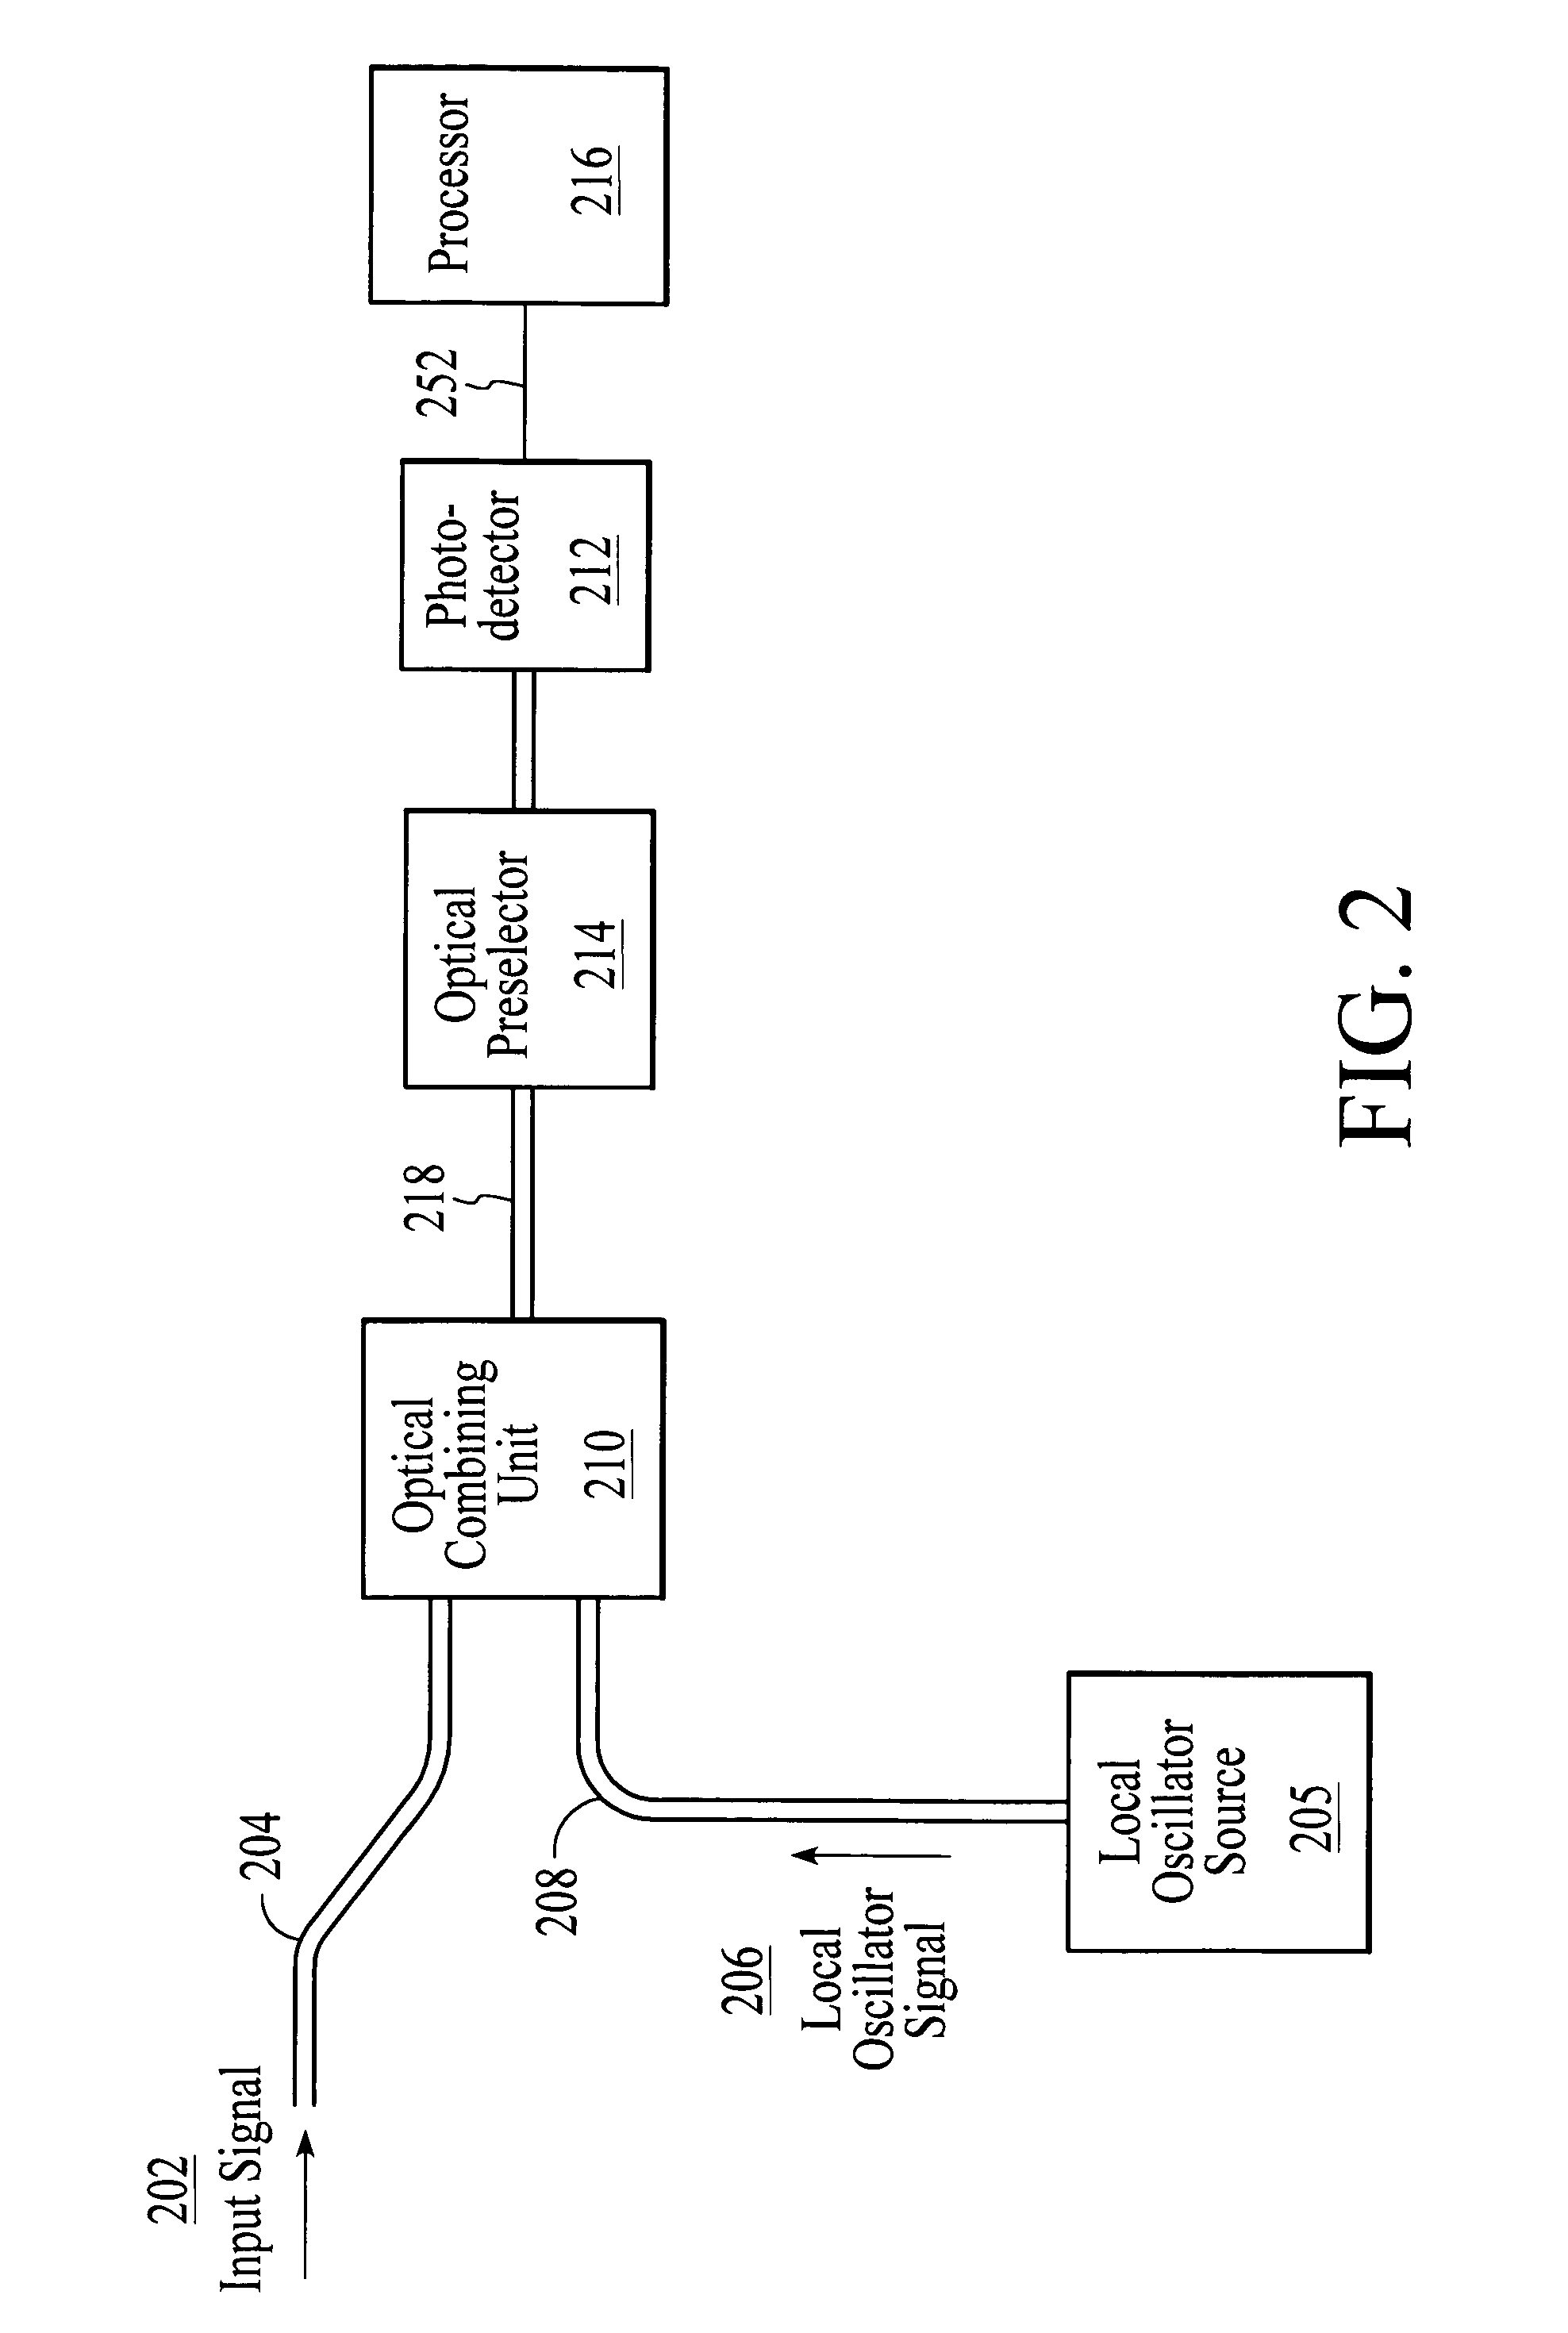 System and method for optical heterodyne detection of an optical signal including optical pre-selection that is adjusted to accurately track a local oscillator signal